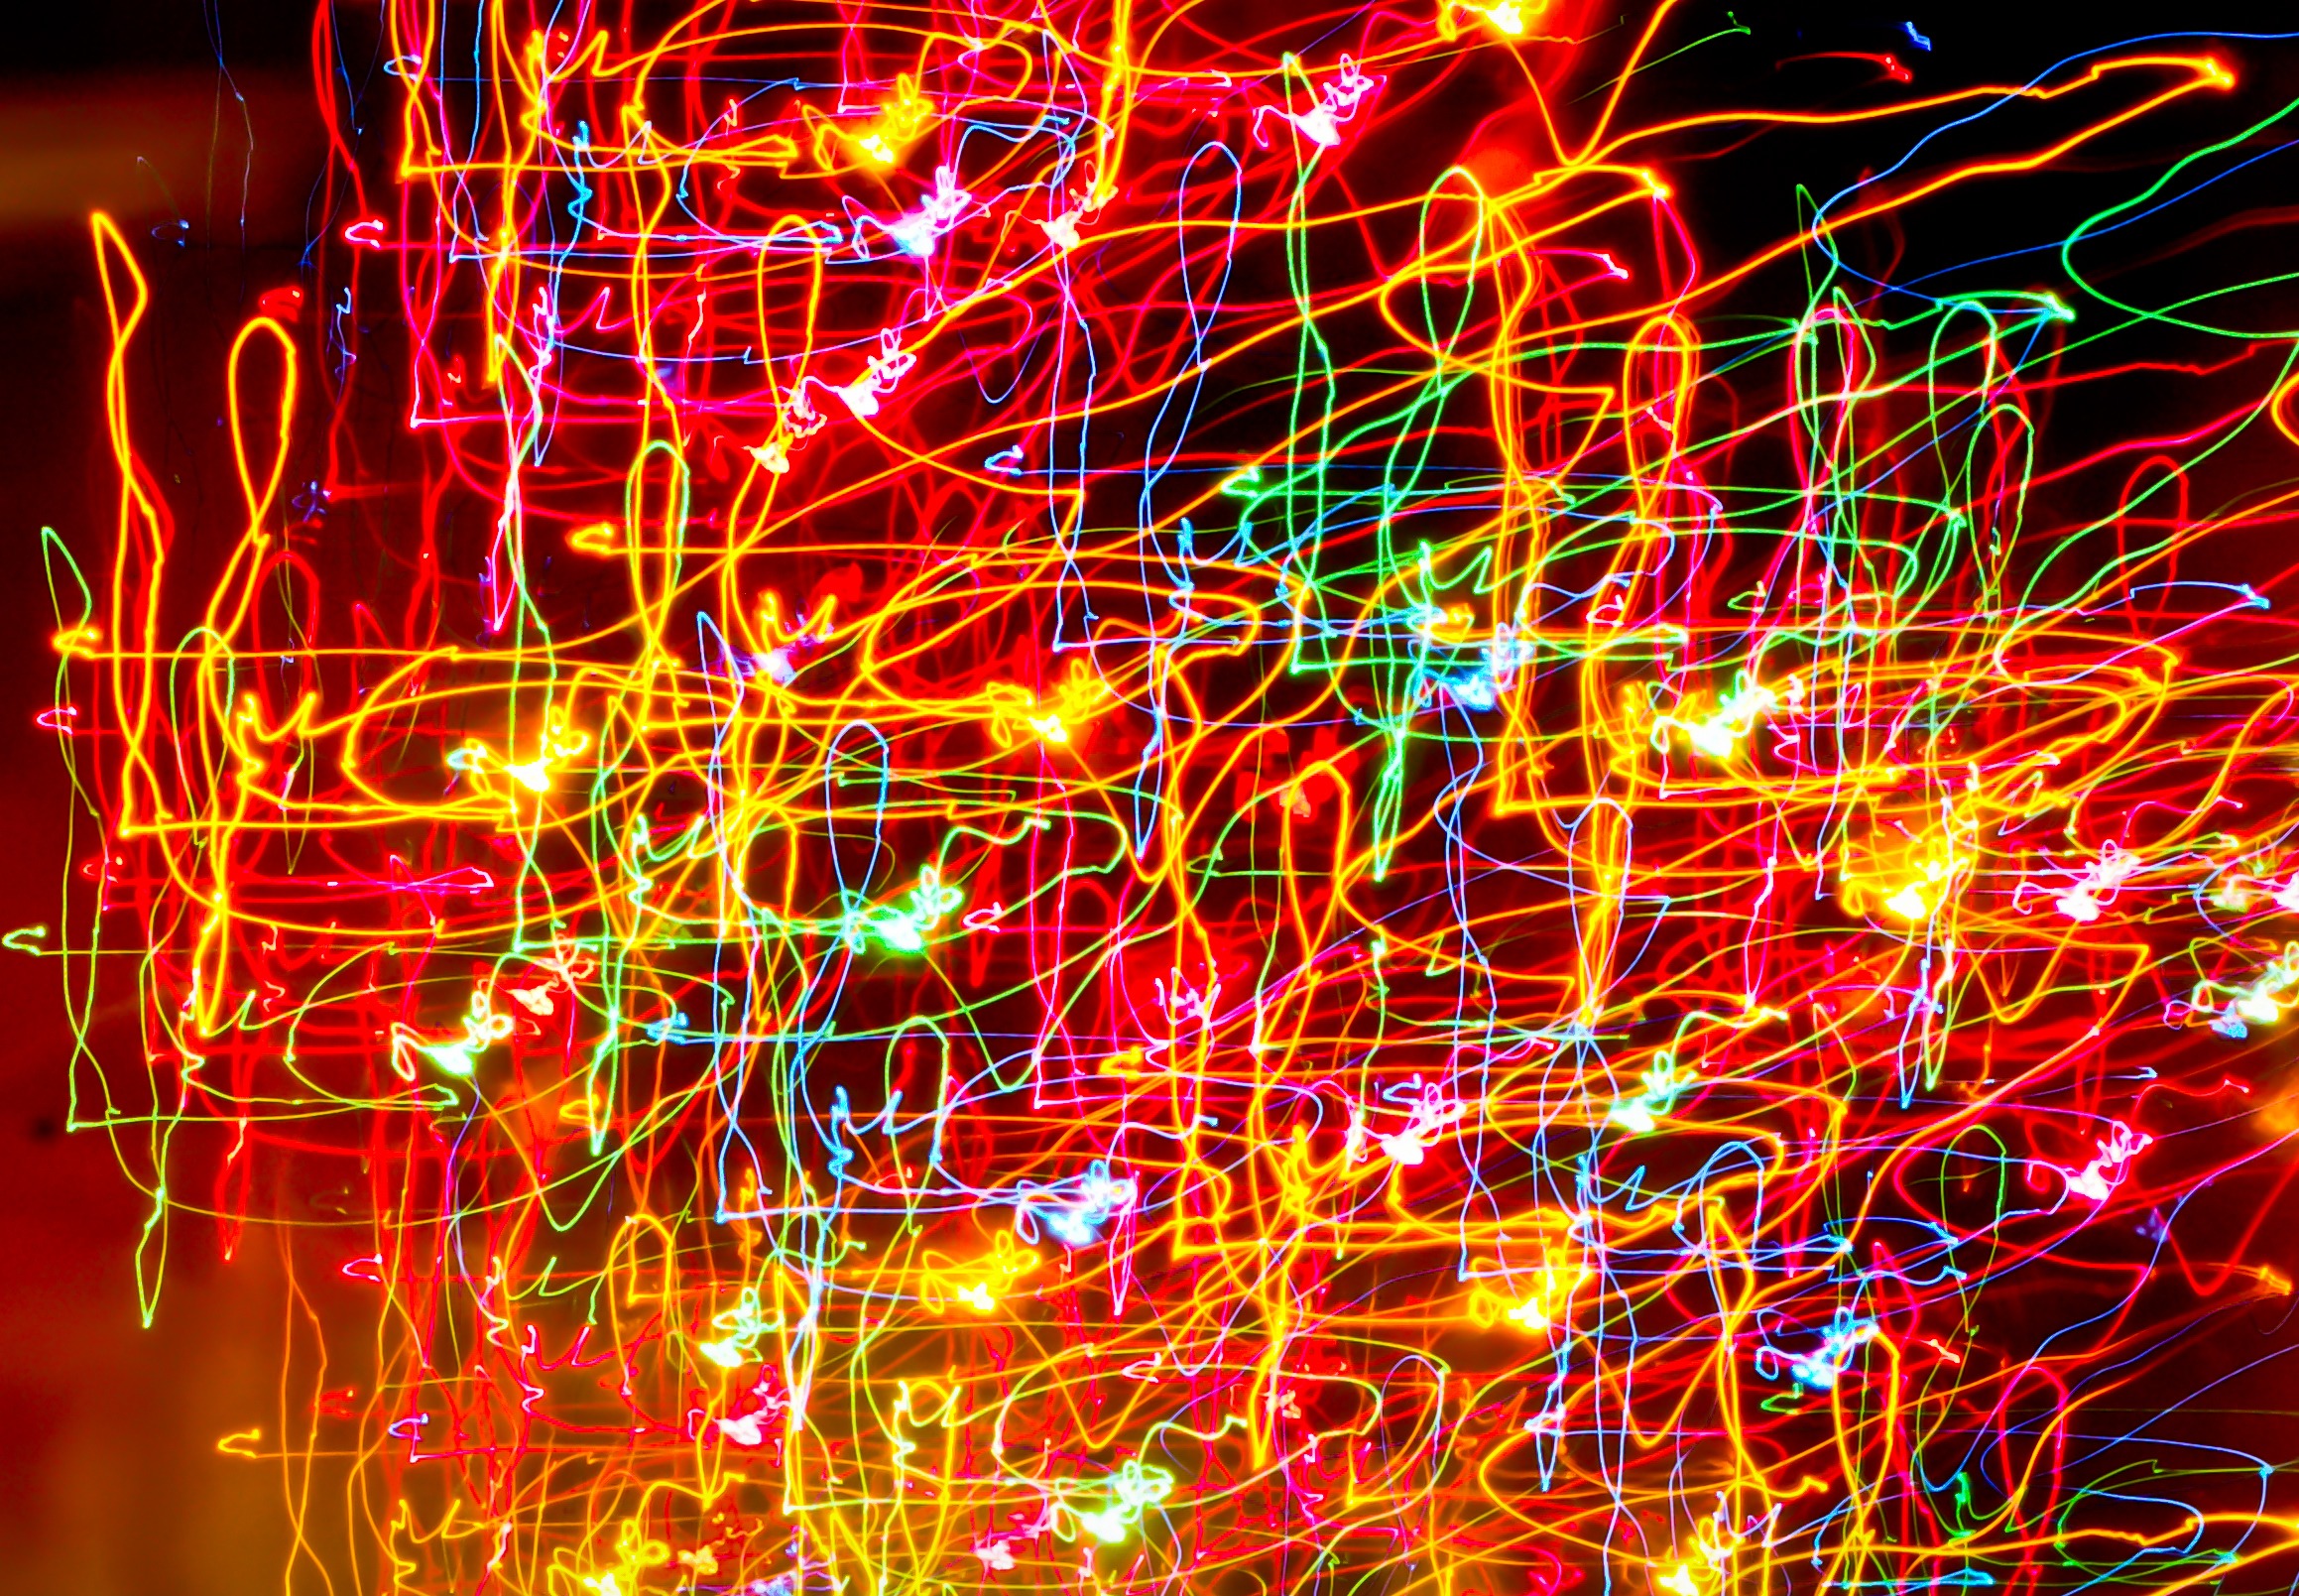 Free Image, abstract, night, texture, colorful, neon, font, lines, colors, illustration, wallpaper, organ, swirls, light trails, christmas lights, psychedelic art, longtime exposure 2318x1609